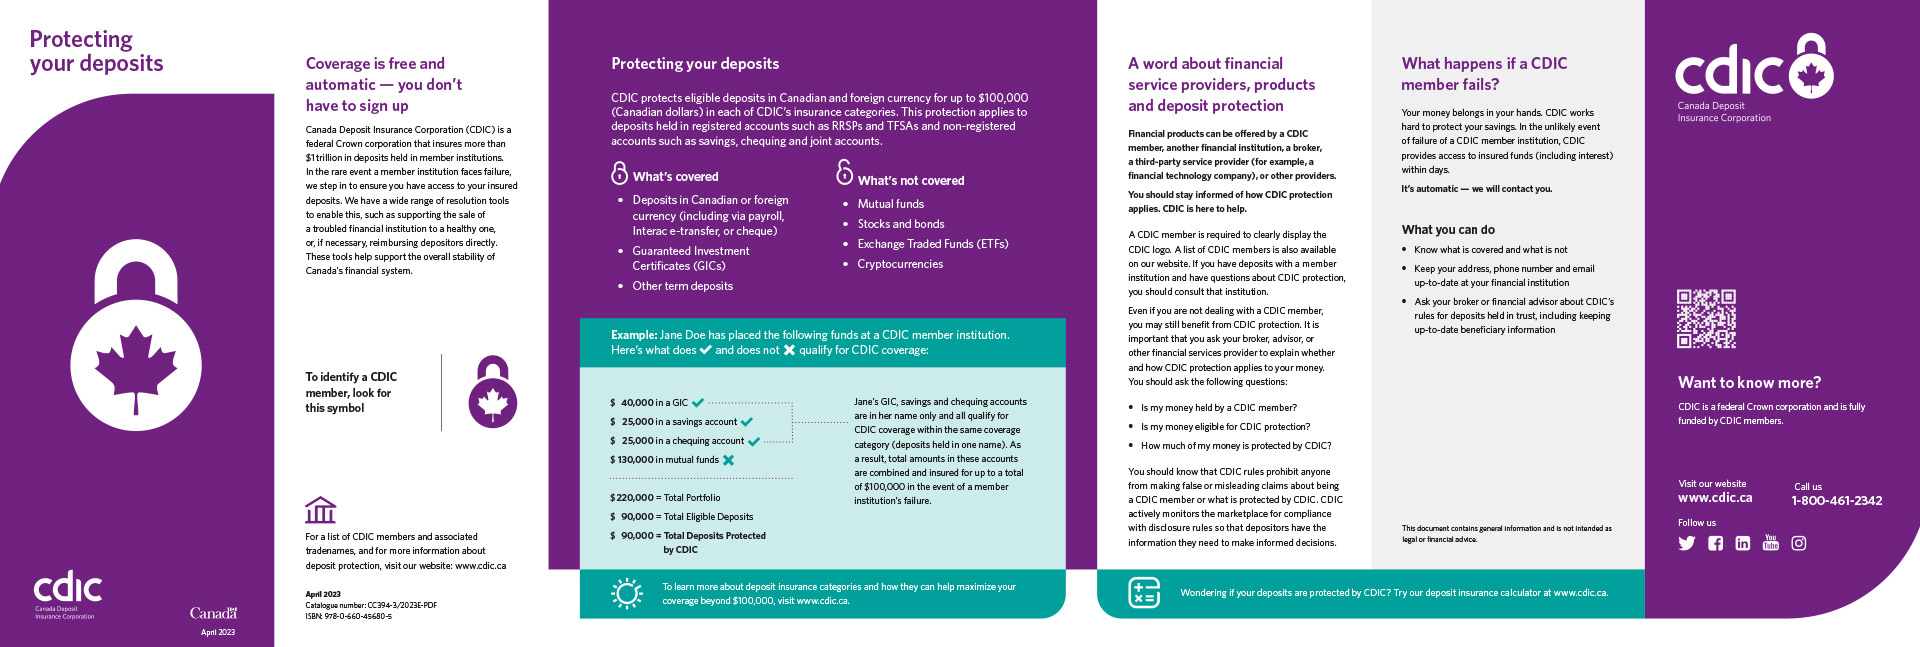 Protecting Your Deposits brochure